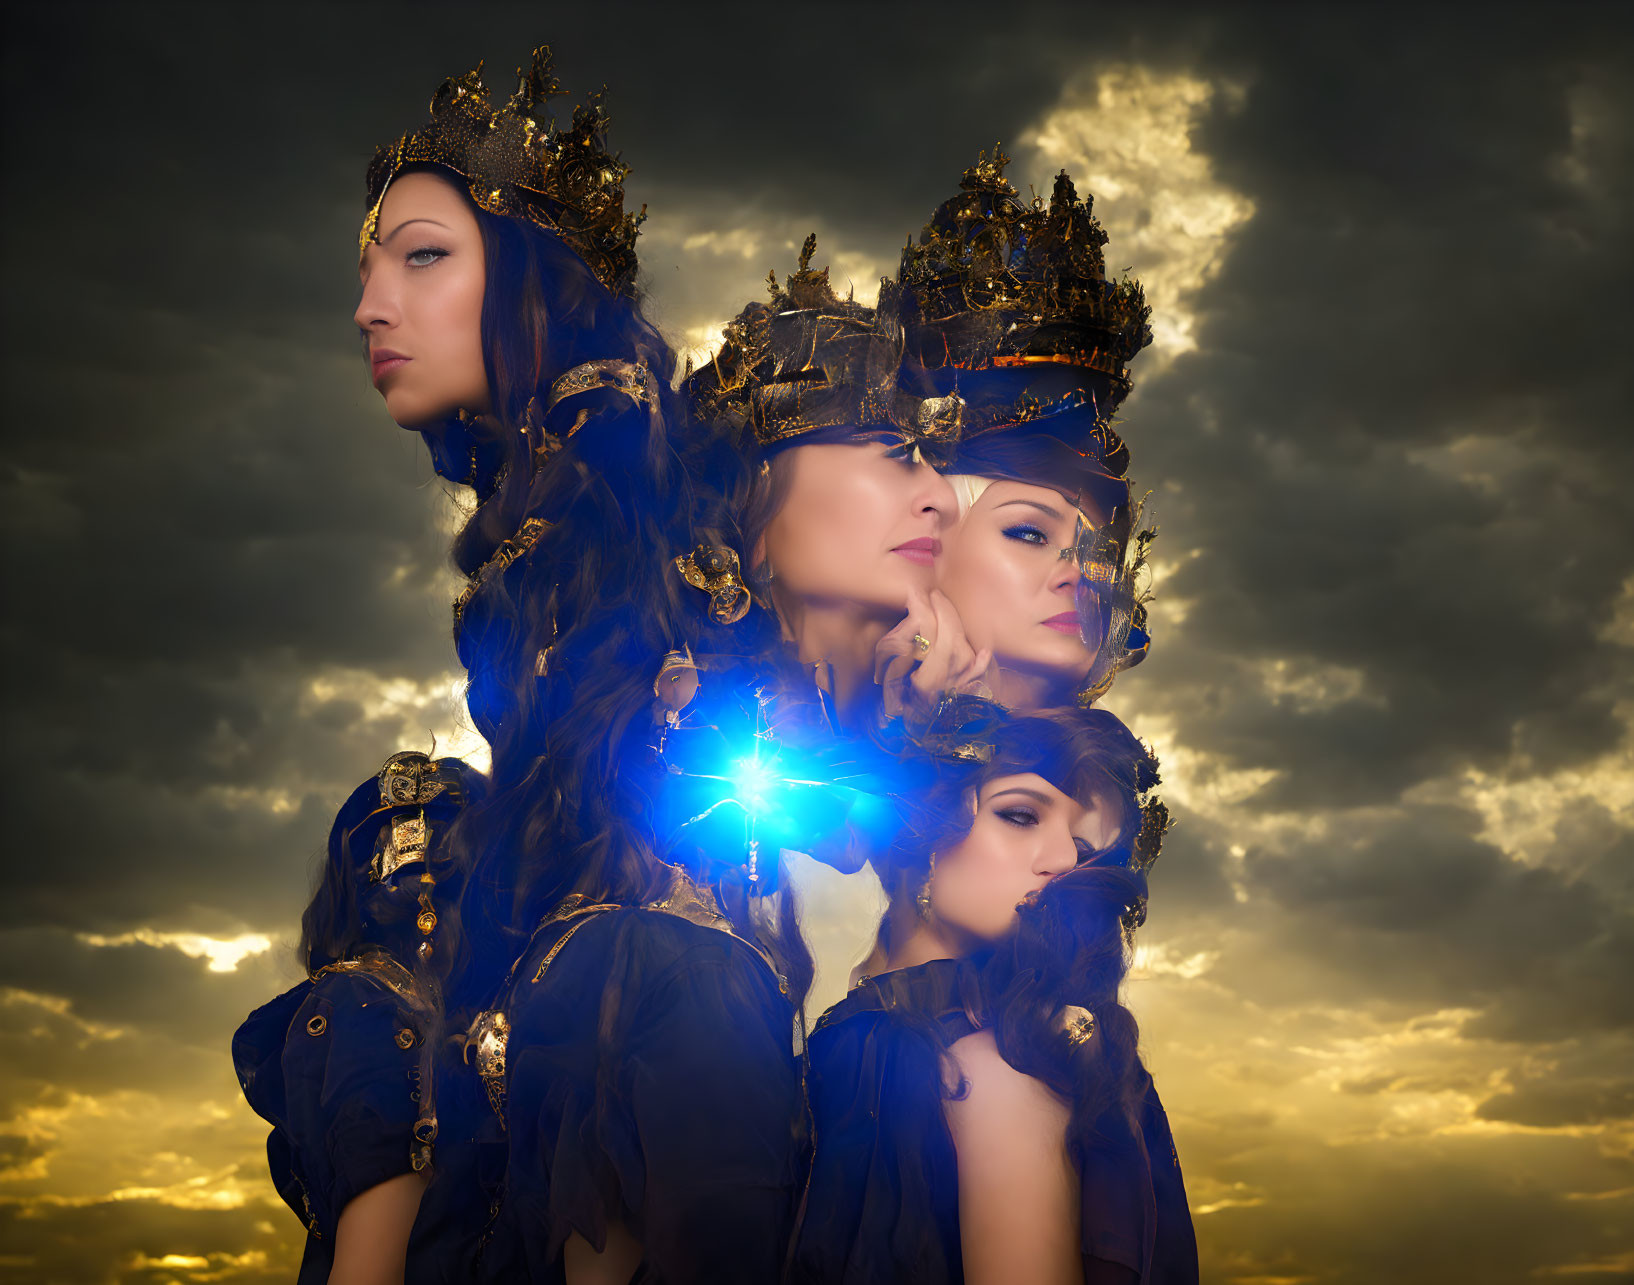 Four women in ornate crowns and blue robes under a mystical sky with a glowing blue orb.